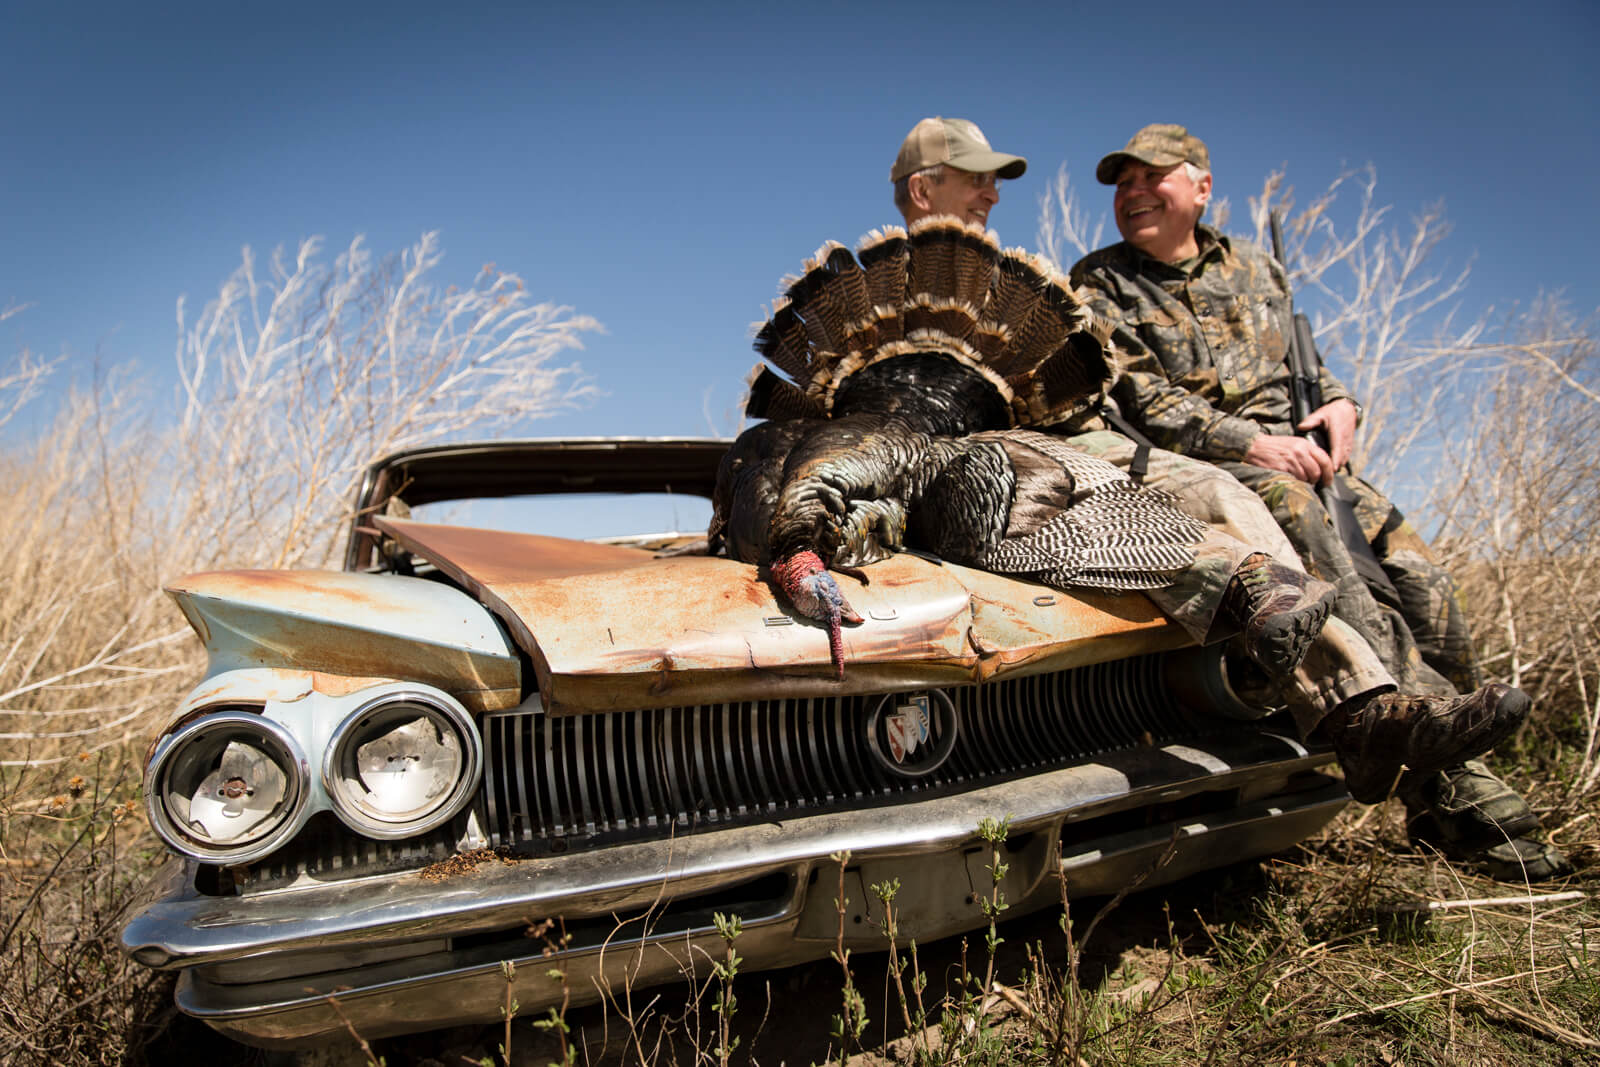 Two hunters and a successfully hunted turkey pose on a rusted car in a field